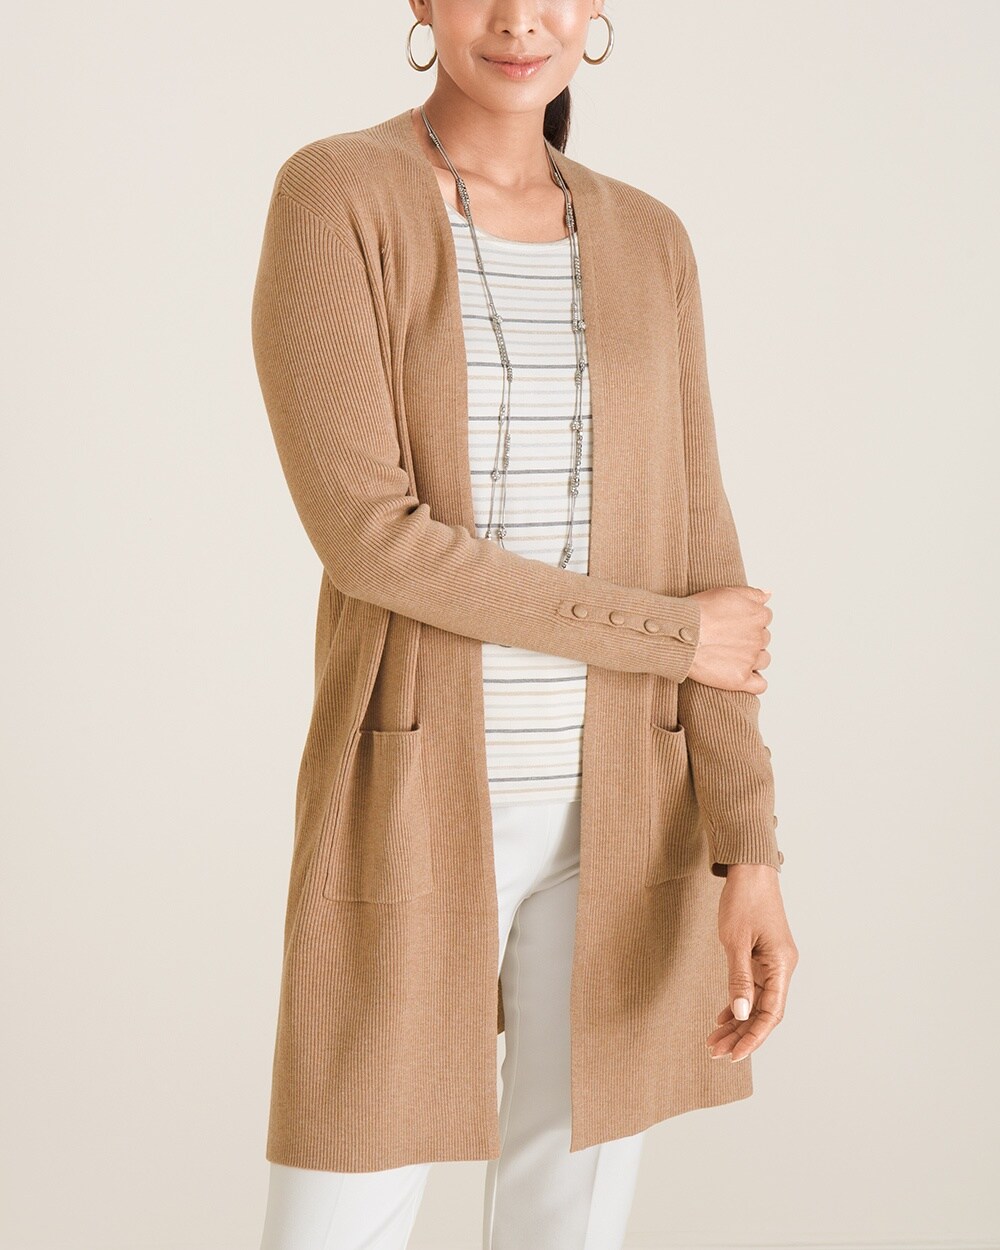 Ribbed Two-Pocket Cardigan Sweater